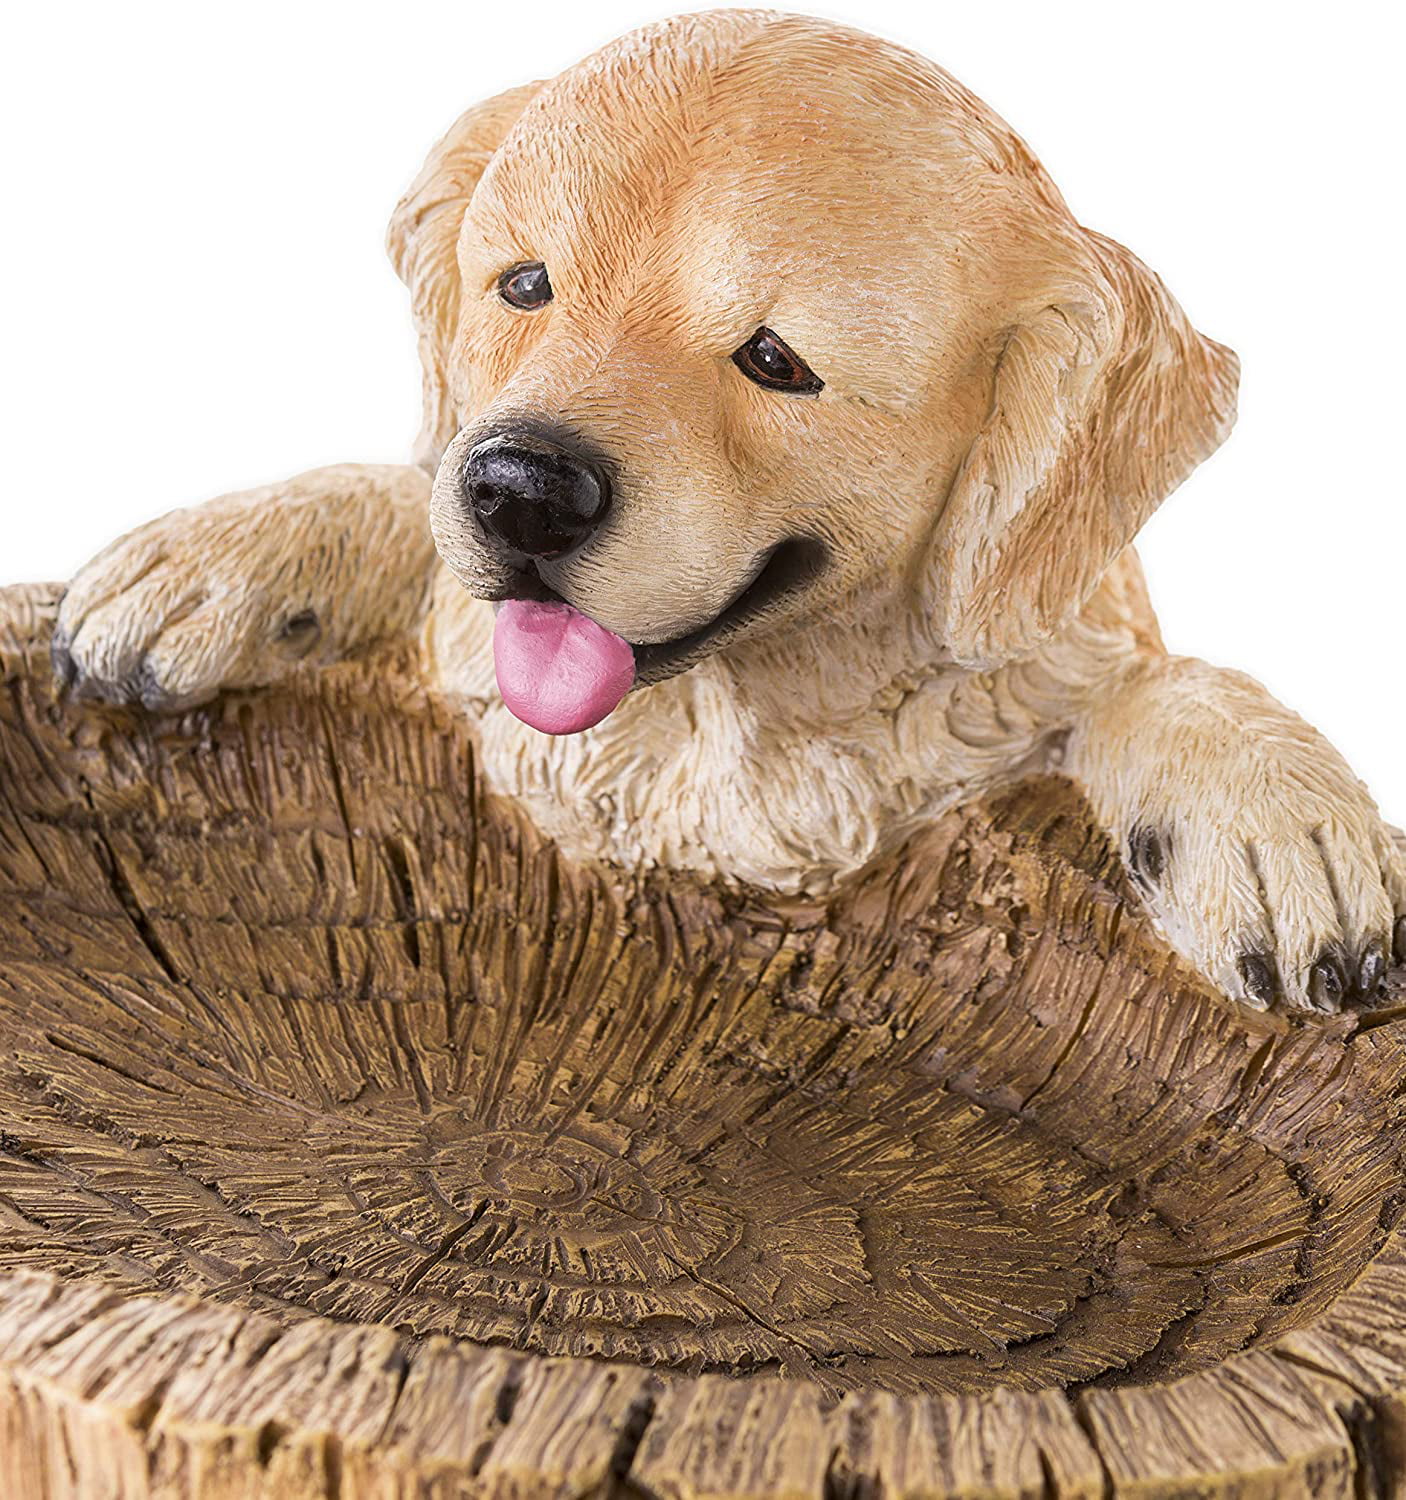 Two Playful Golden Retriever Puppies Resin Birdbath Hand-Painted All-Weather Wood-Look Resin Landscape and Garden Accent for Outdoor Garden Lawn Yard Decorations